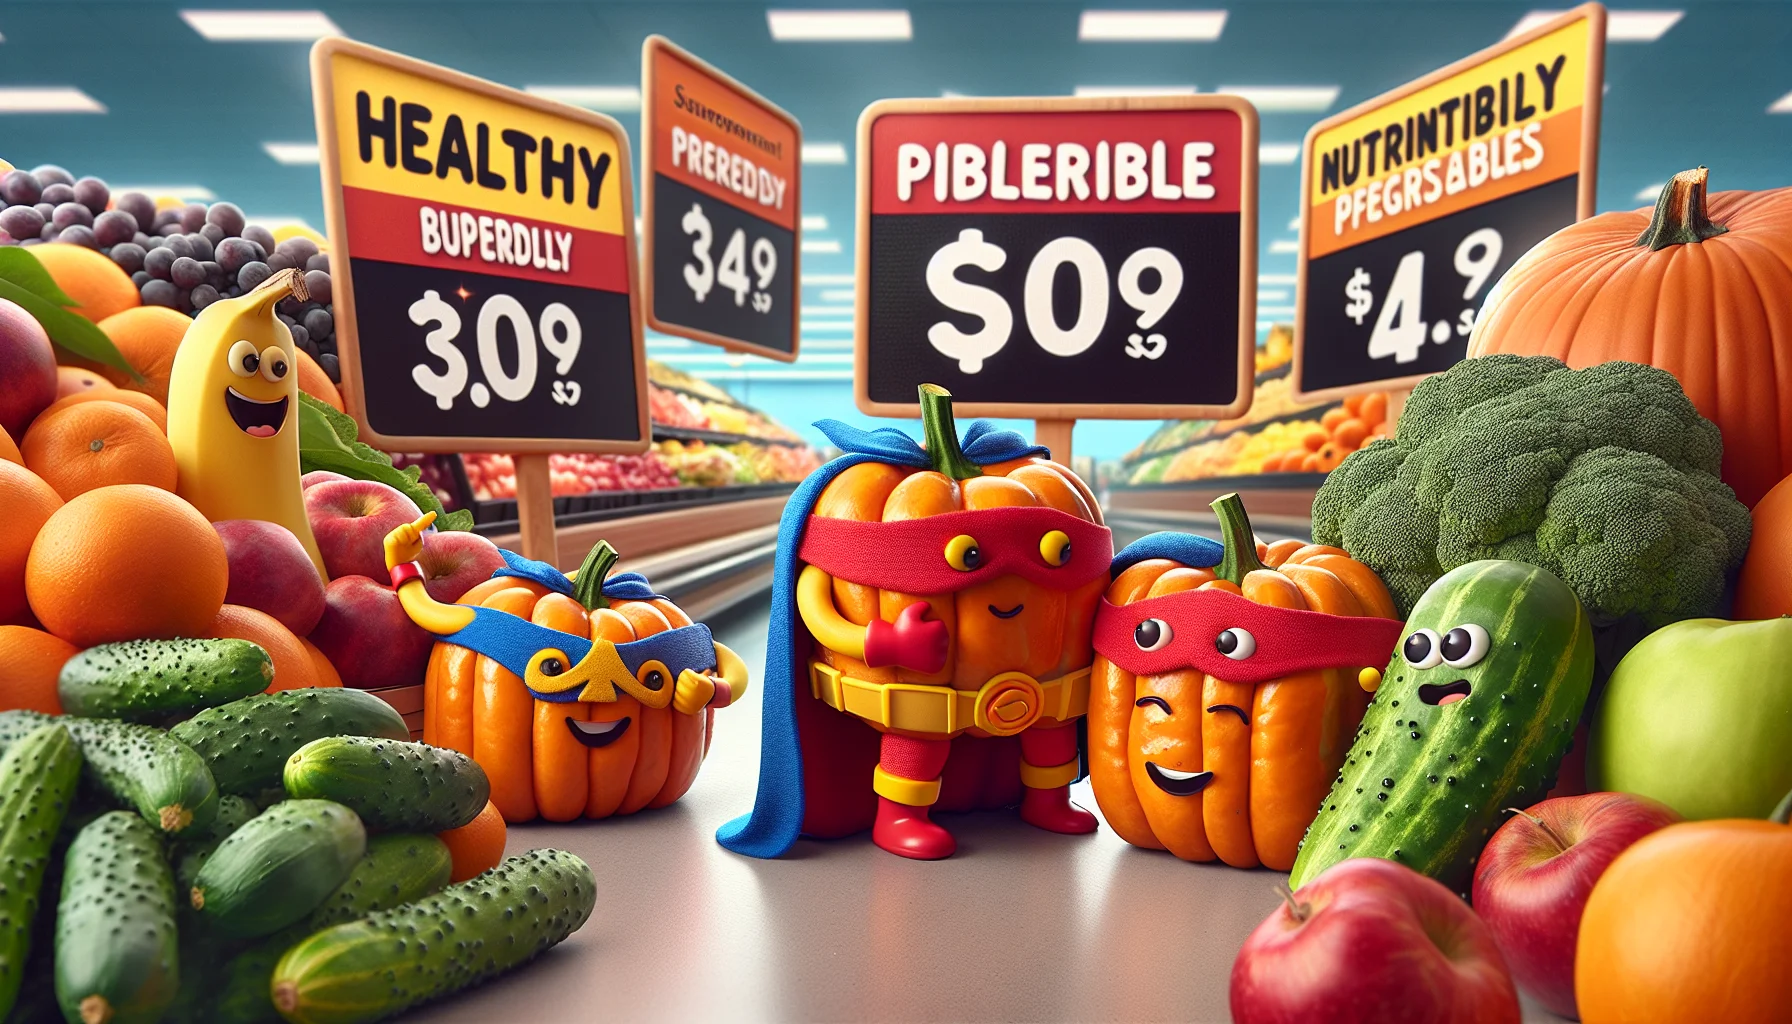 Create a vivid image portraying a humorous and irresistible scene. It features Festive Pumpkin Sweet Rolls satirically dressed in superhero costumes promoting the healthy and budget-friendly aspects of their own. They're showcased in a colorful grocery store setting, surrounded by price tags that amusingly depict the inexpensive nature of these nutrition-packed delights. Adding to the humor, have other fruits and vegetables looking on in surprise and admiration. Include vibrant colors to add to the festive theme and make the scene lighthearted and appealing.